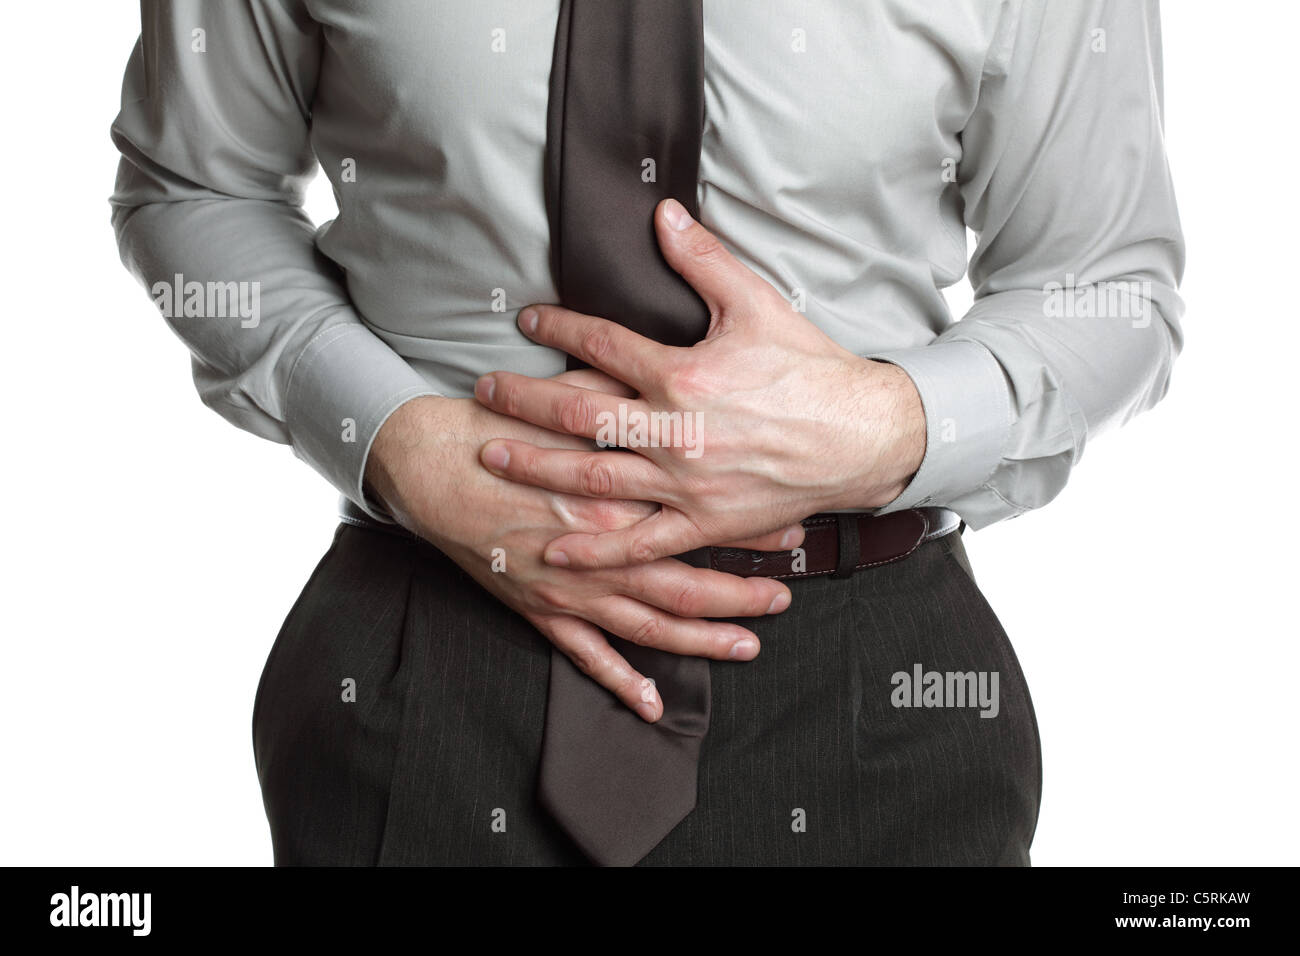 Businessman with stomach ache Stock Photo